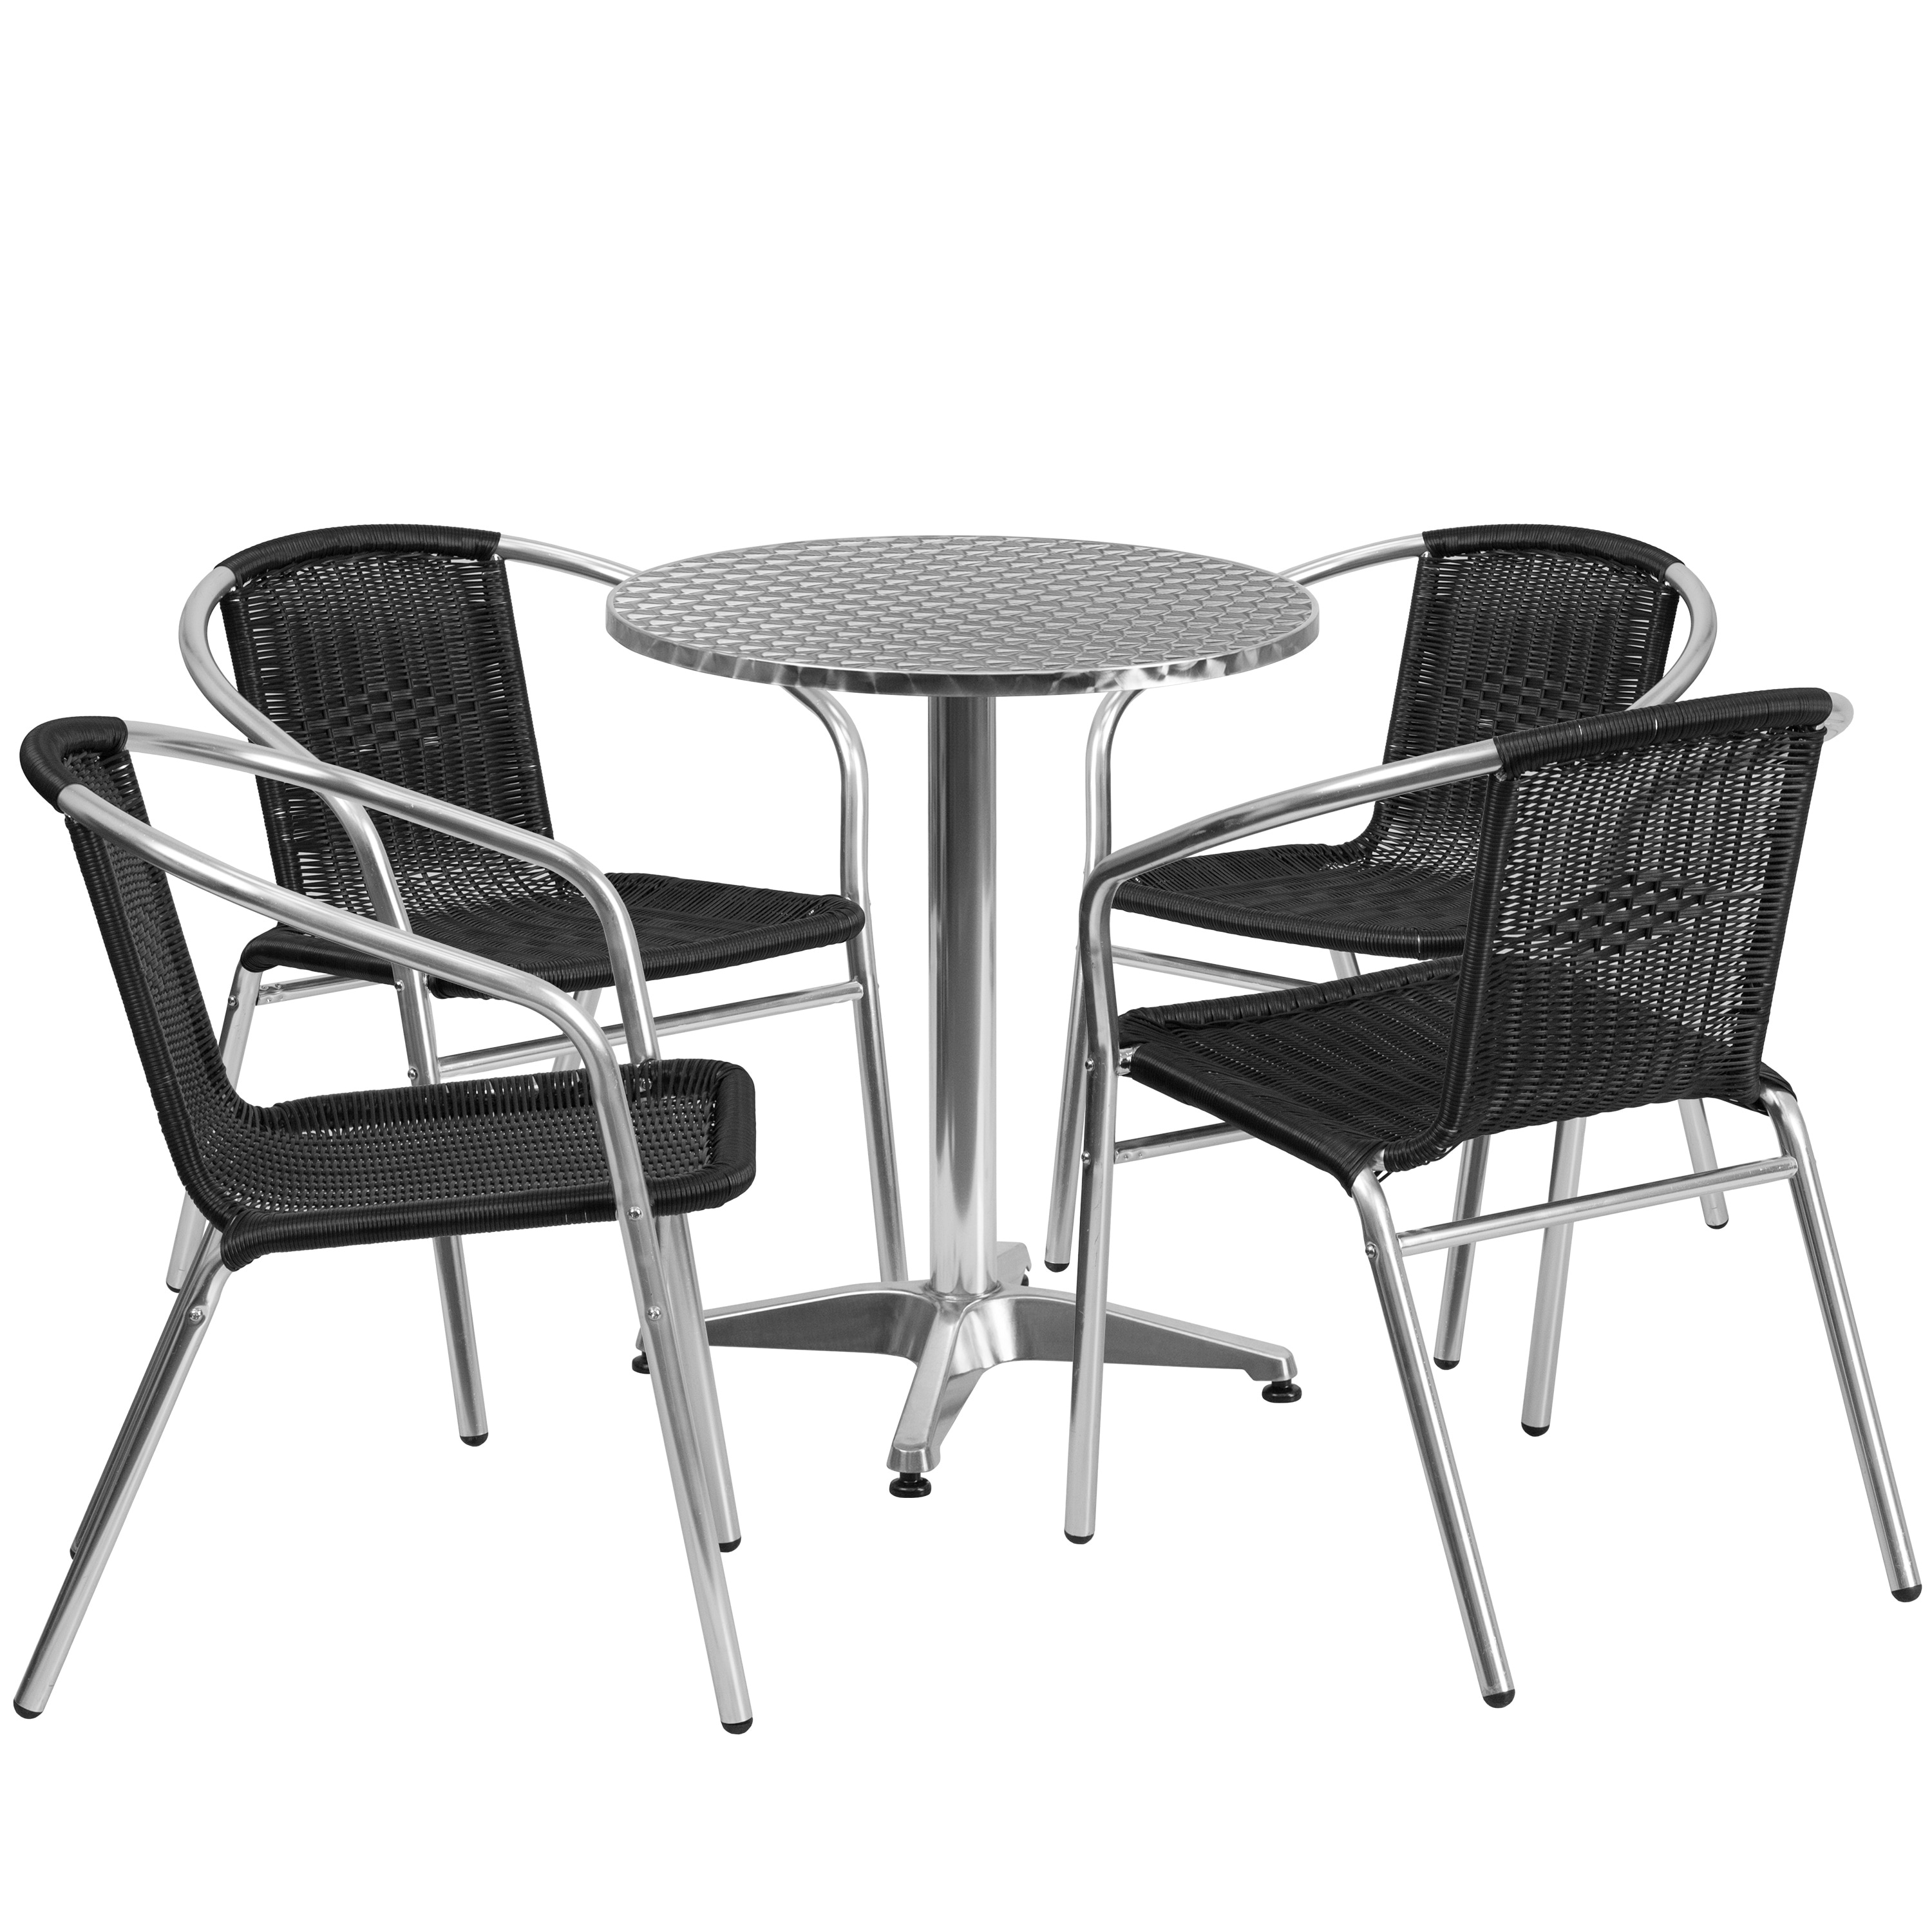 23.5-inch Round Aluminum Indoor-outdoor Table With 4 Rattan Chairs